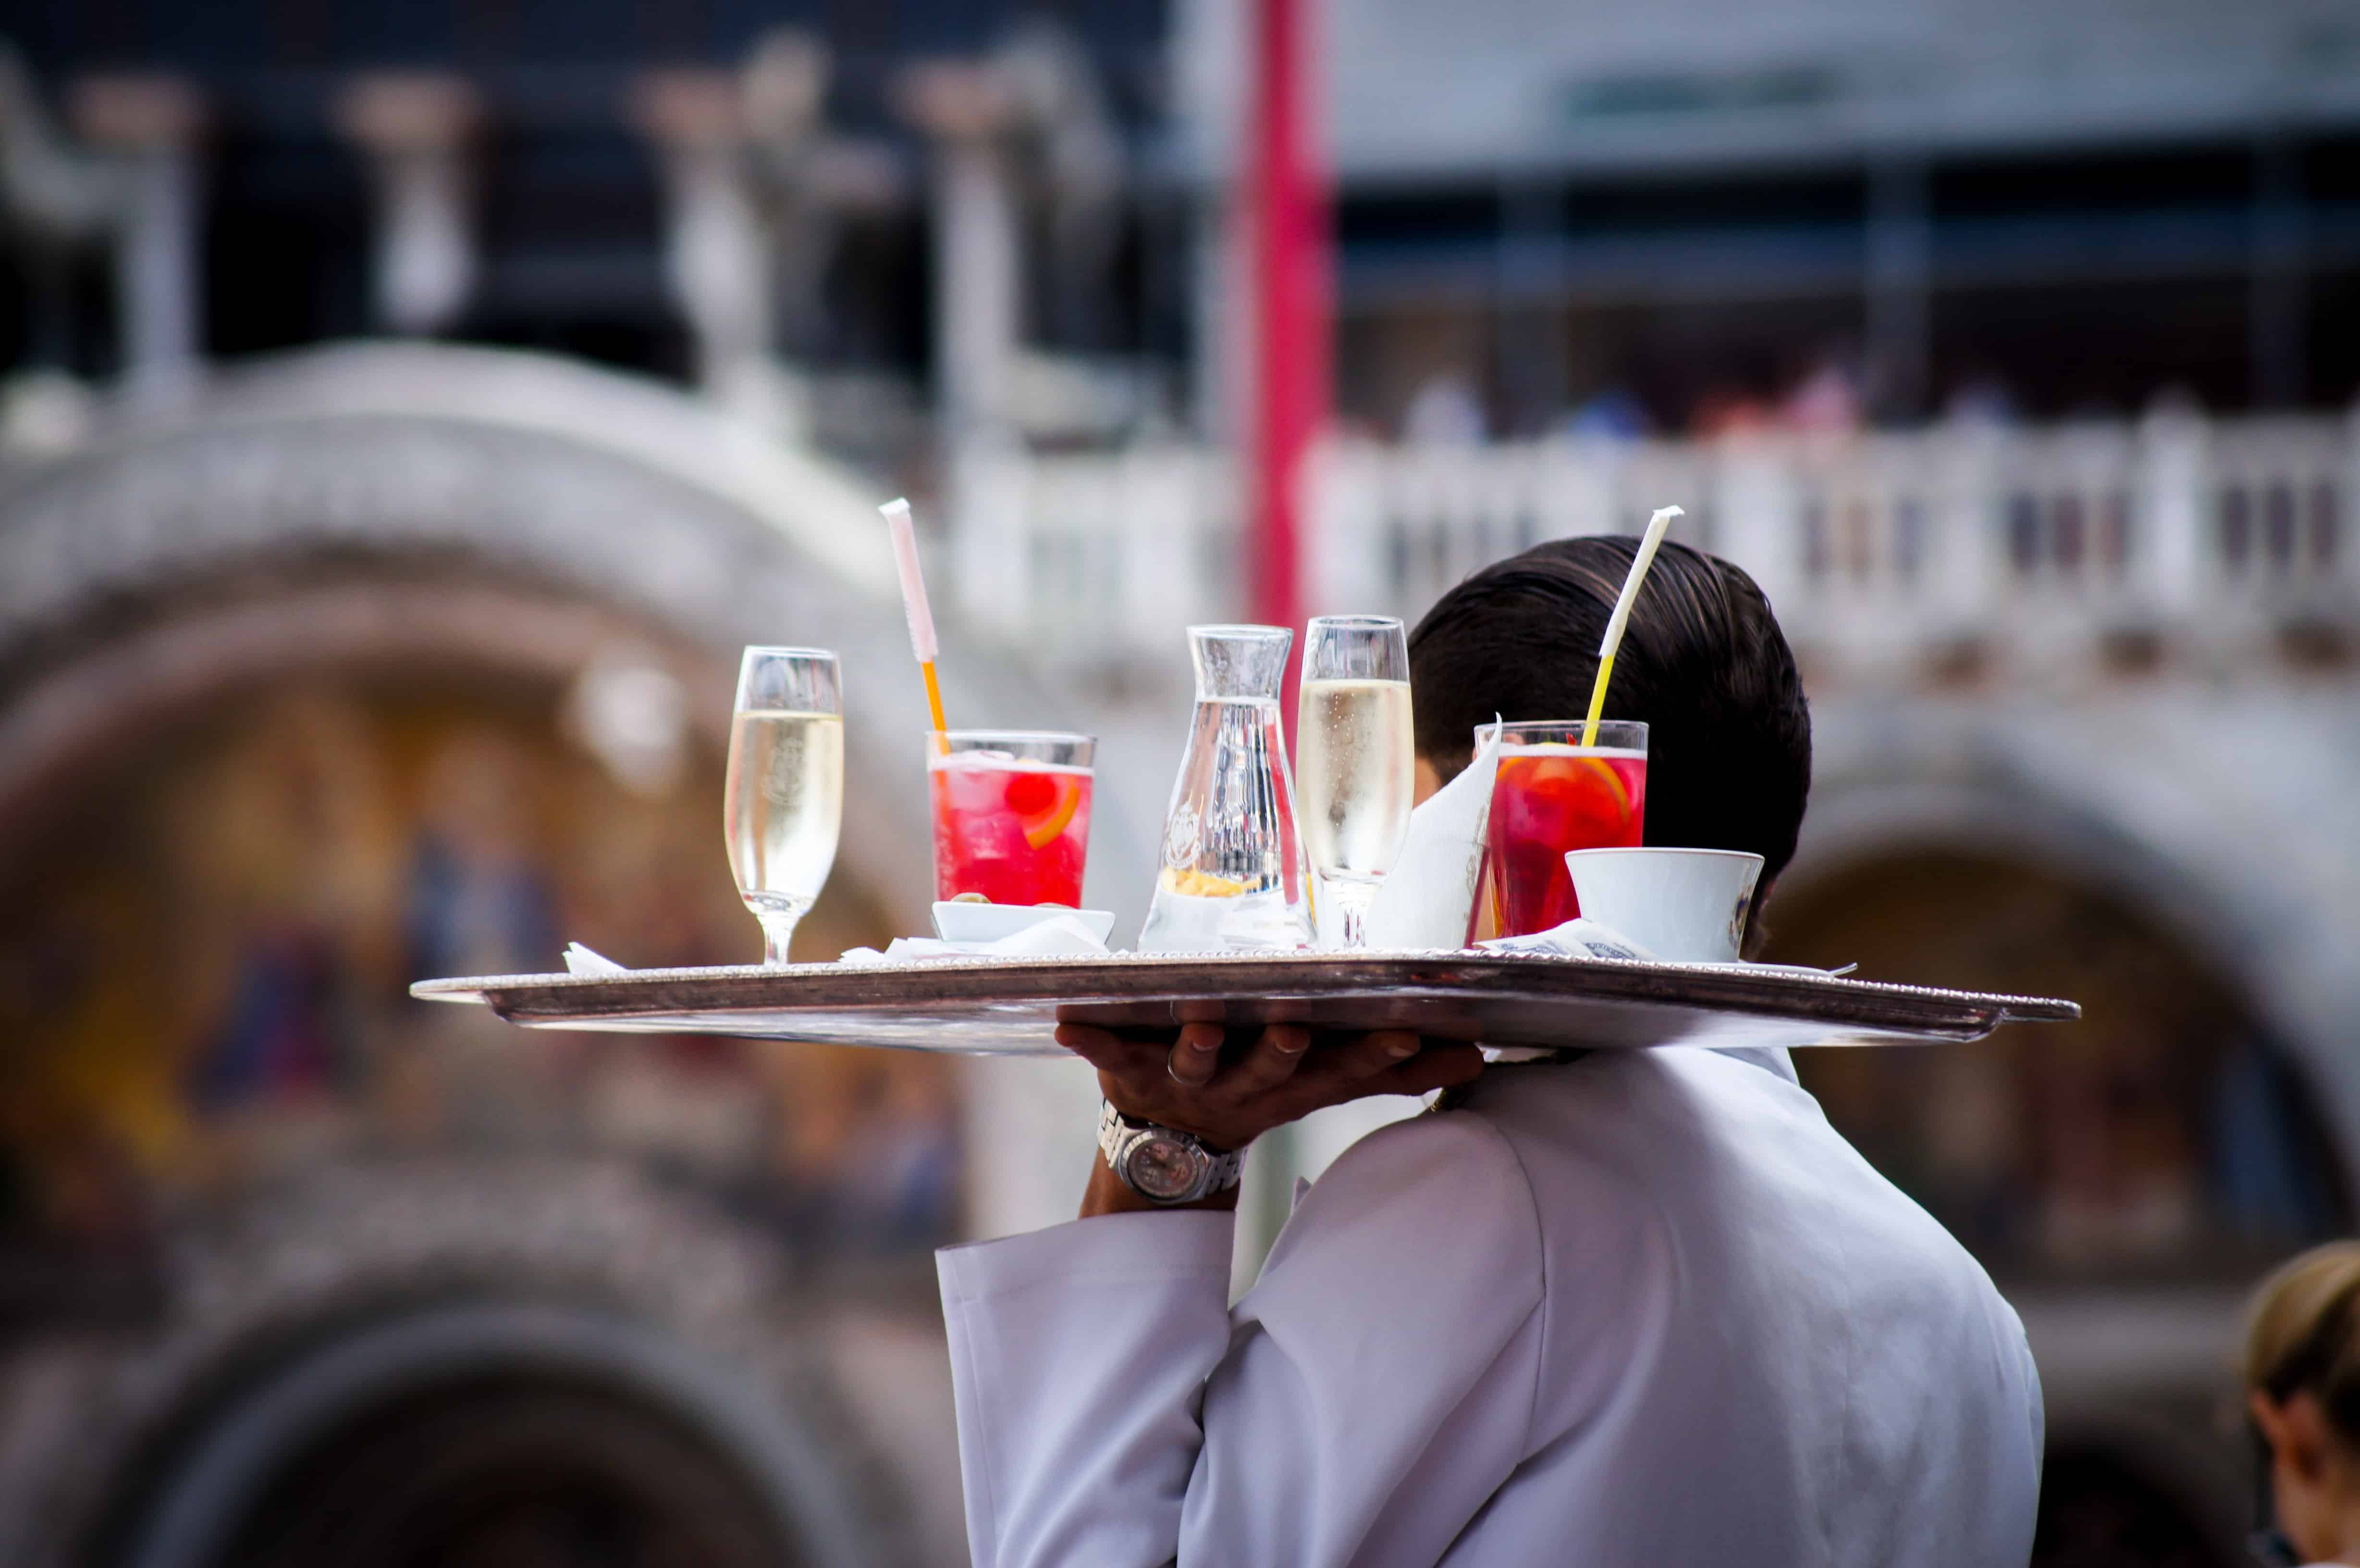 A server carrying a platter of drinks